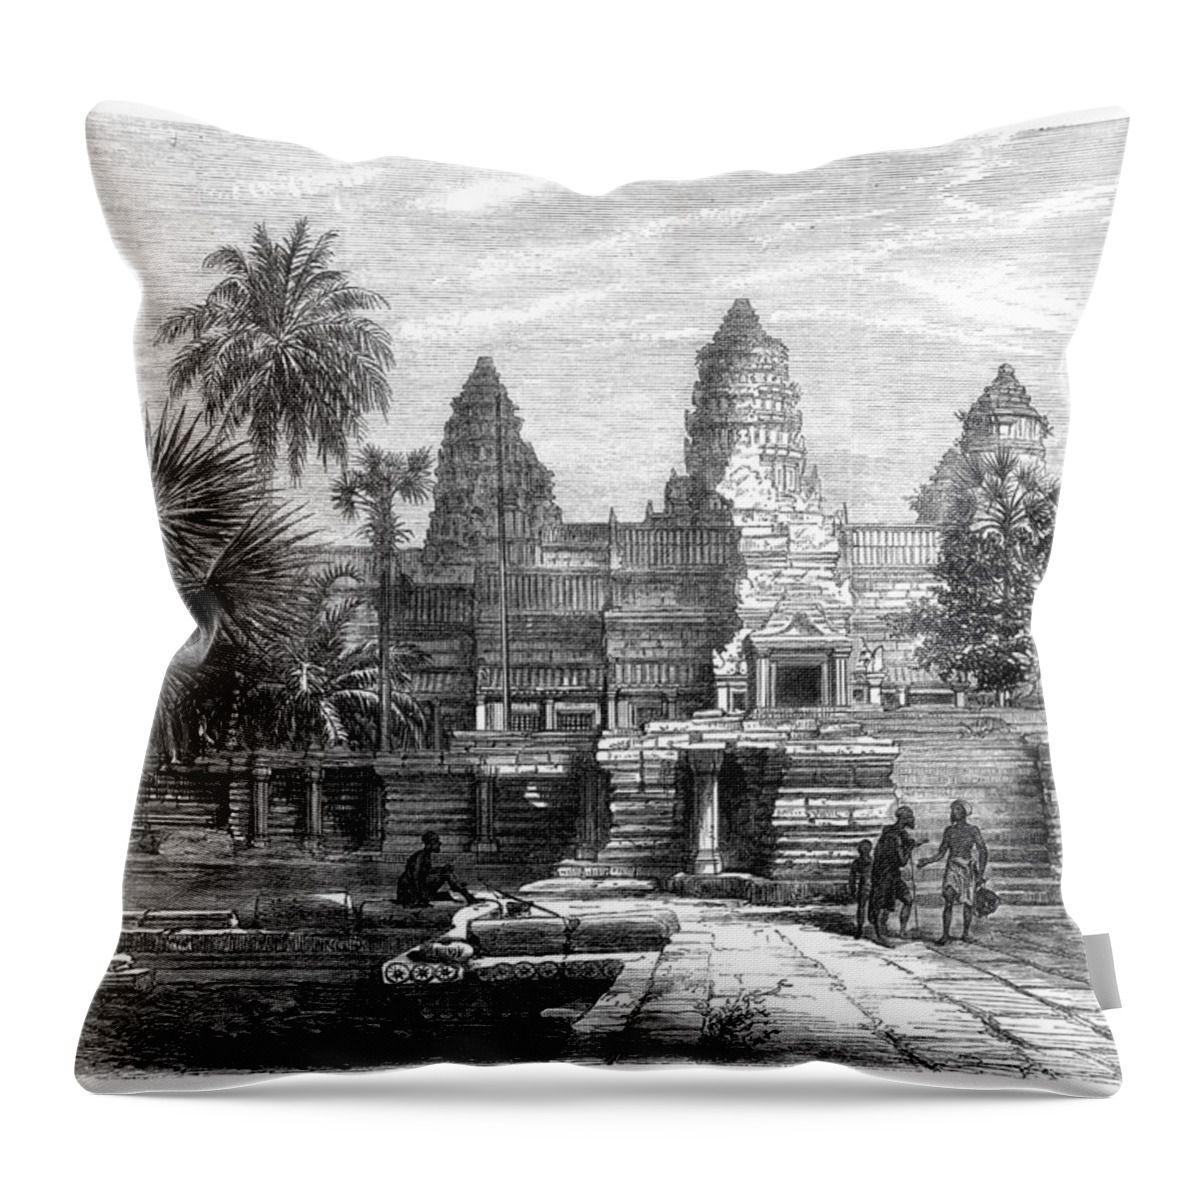 1868 Throw Pillow featuring the photograph Angkor Wat, Cambodia, 1868 #1 by Granger